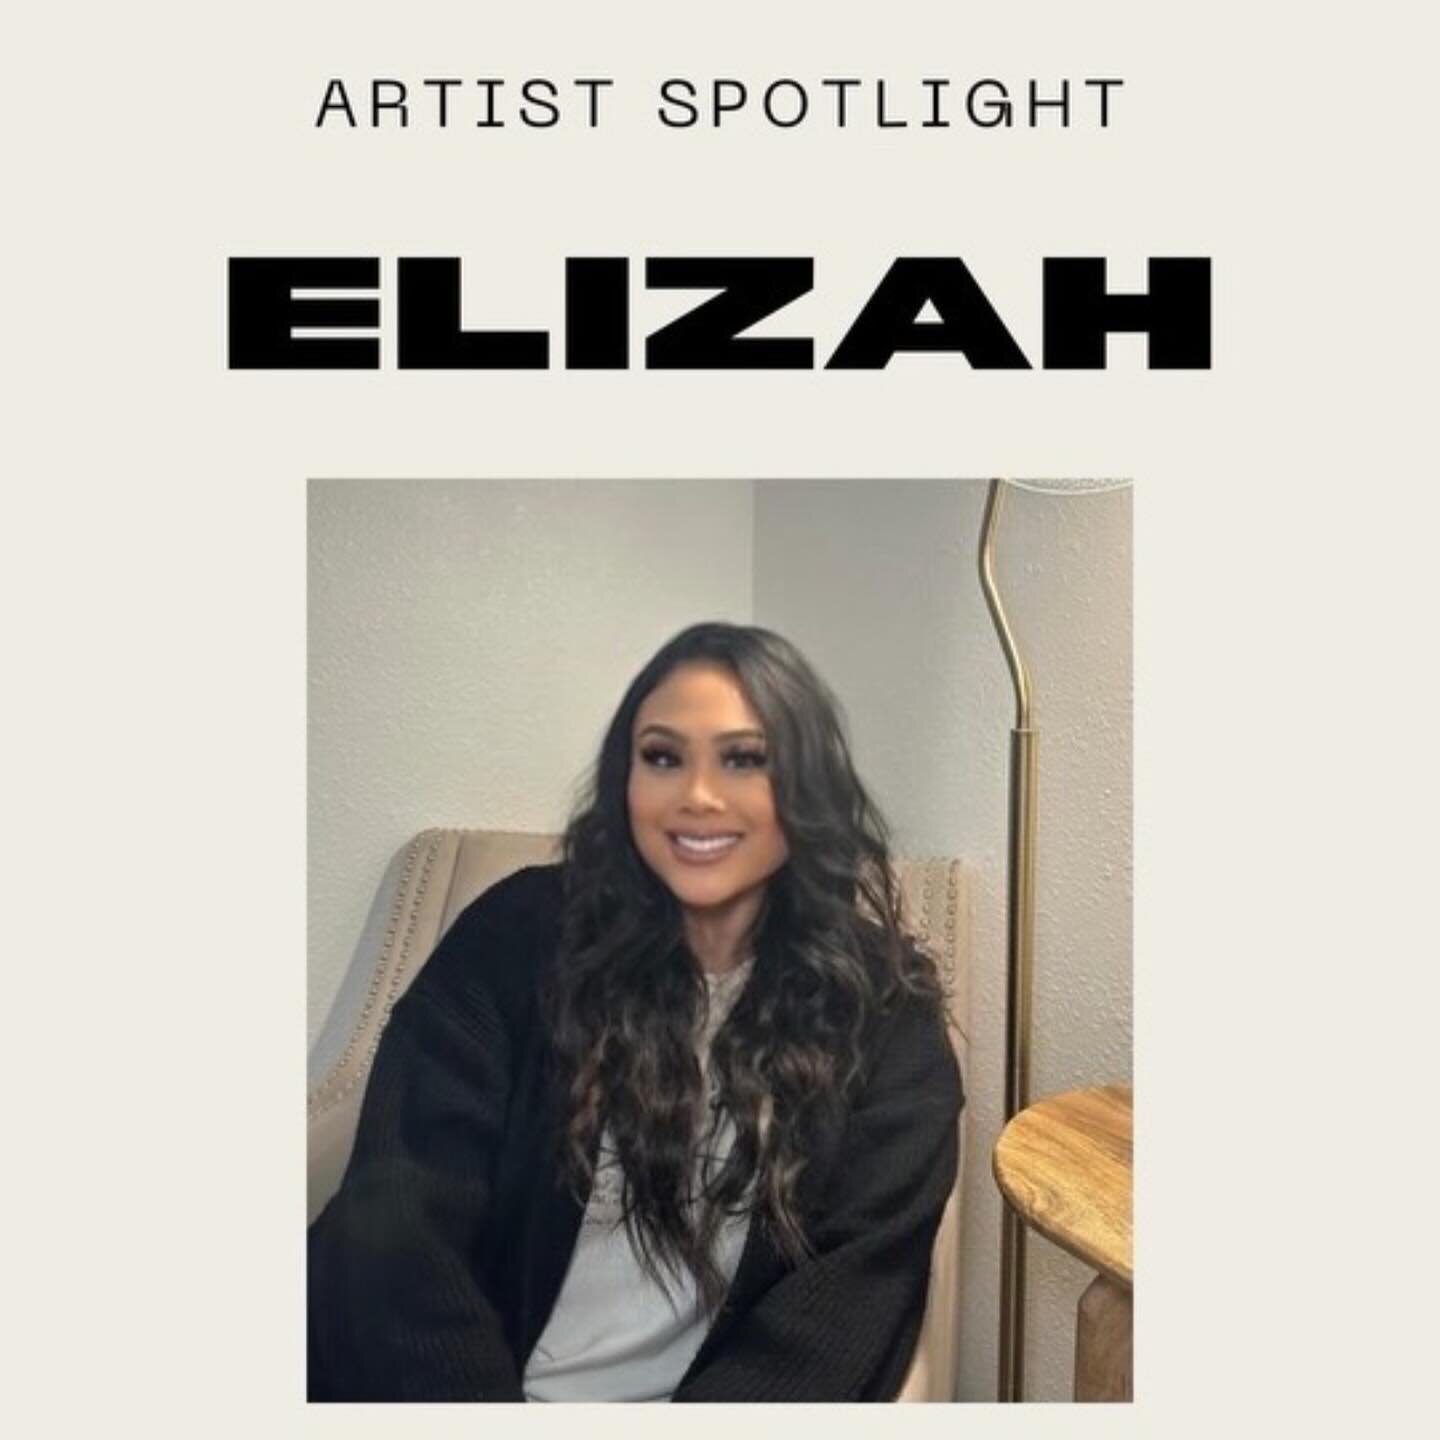 Meet Elizah! Our Master Lash + Brow Artist! We ar so thankful for you and all that you do! 😍✨

Elizah: &ldquo;Hi it&rsquo;s me! 🥰 

Can&rsquo;t believe it&rsquo;s been 4 years being in this industry. So thankful for everyone I&rsquo;ve met along th